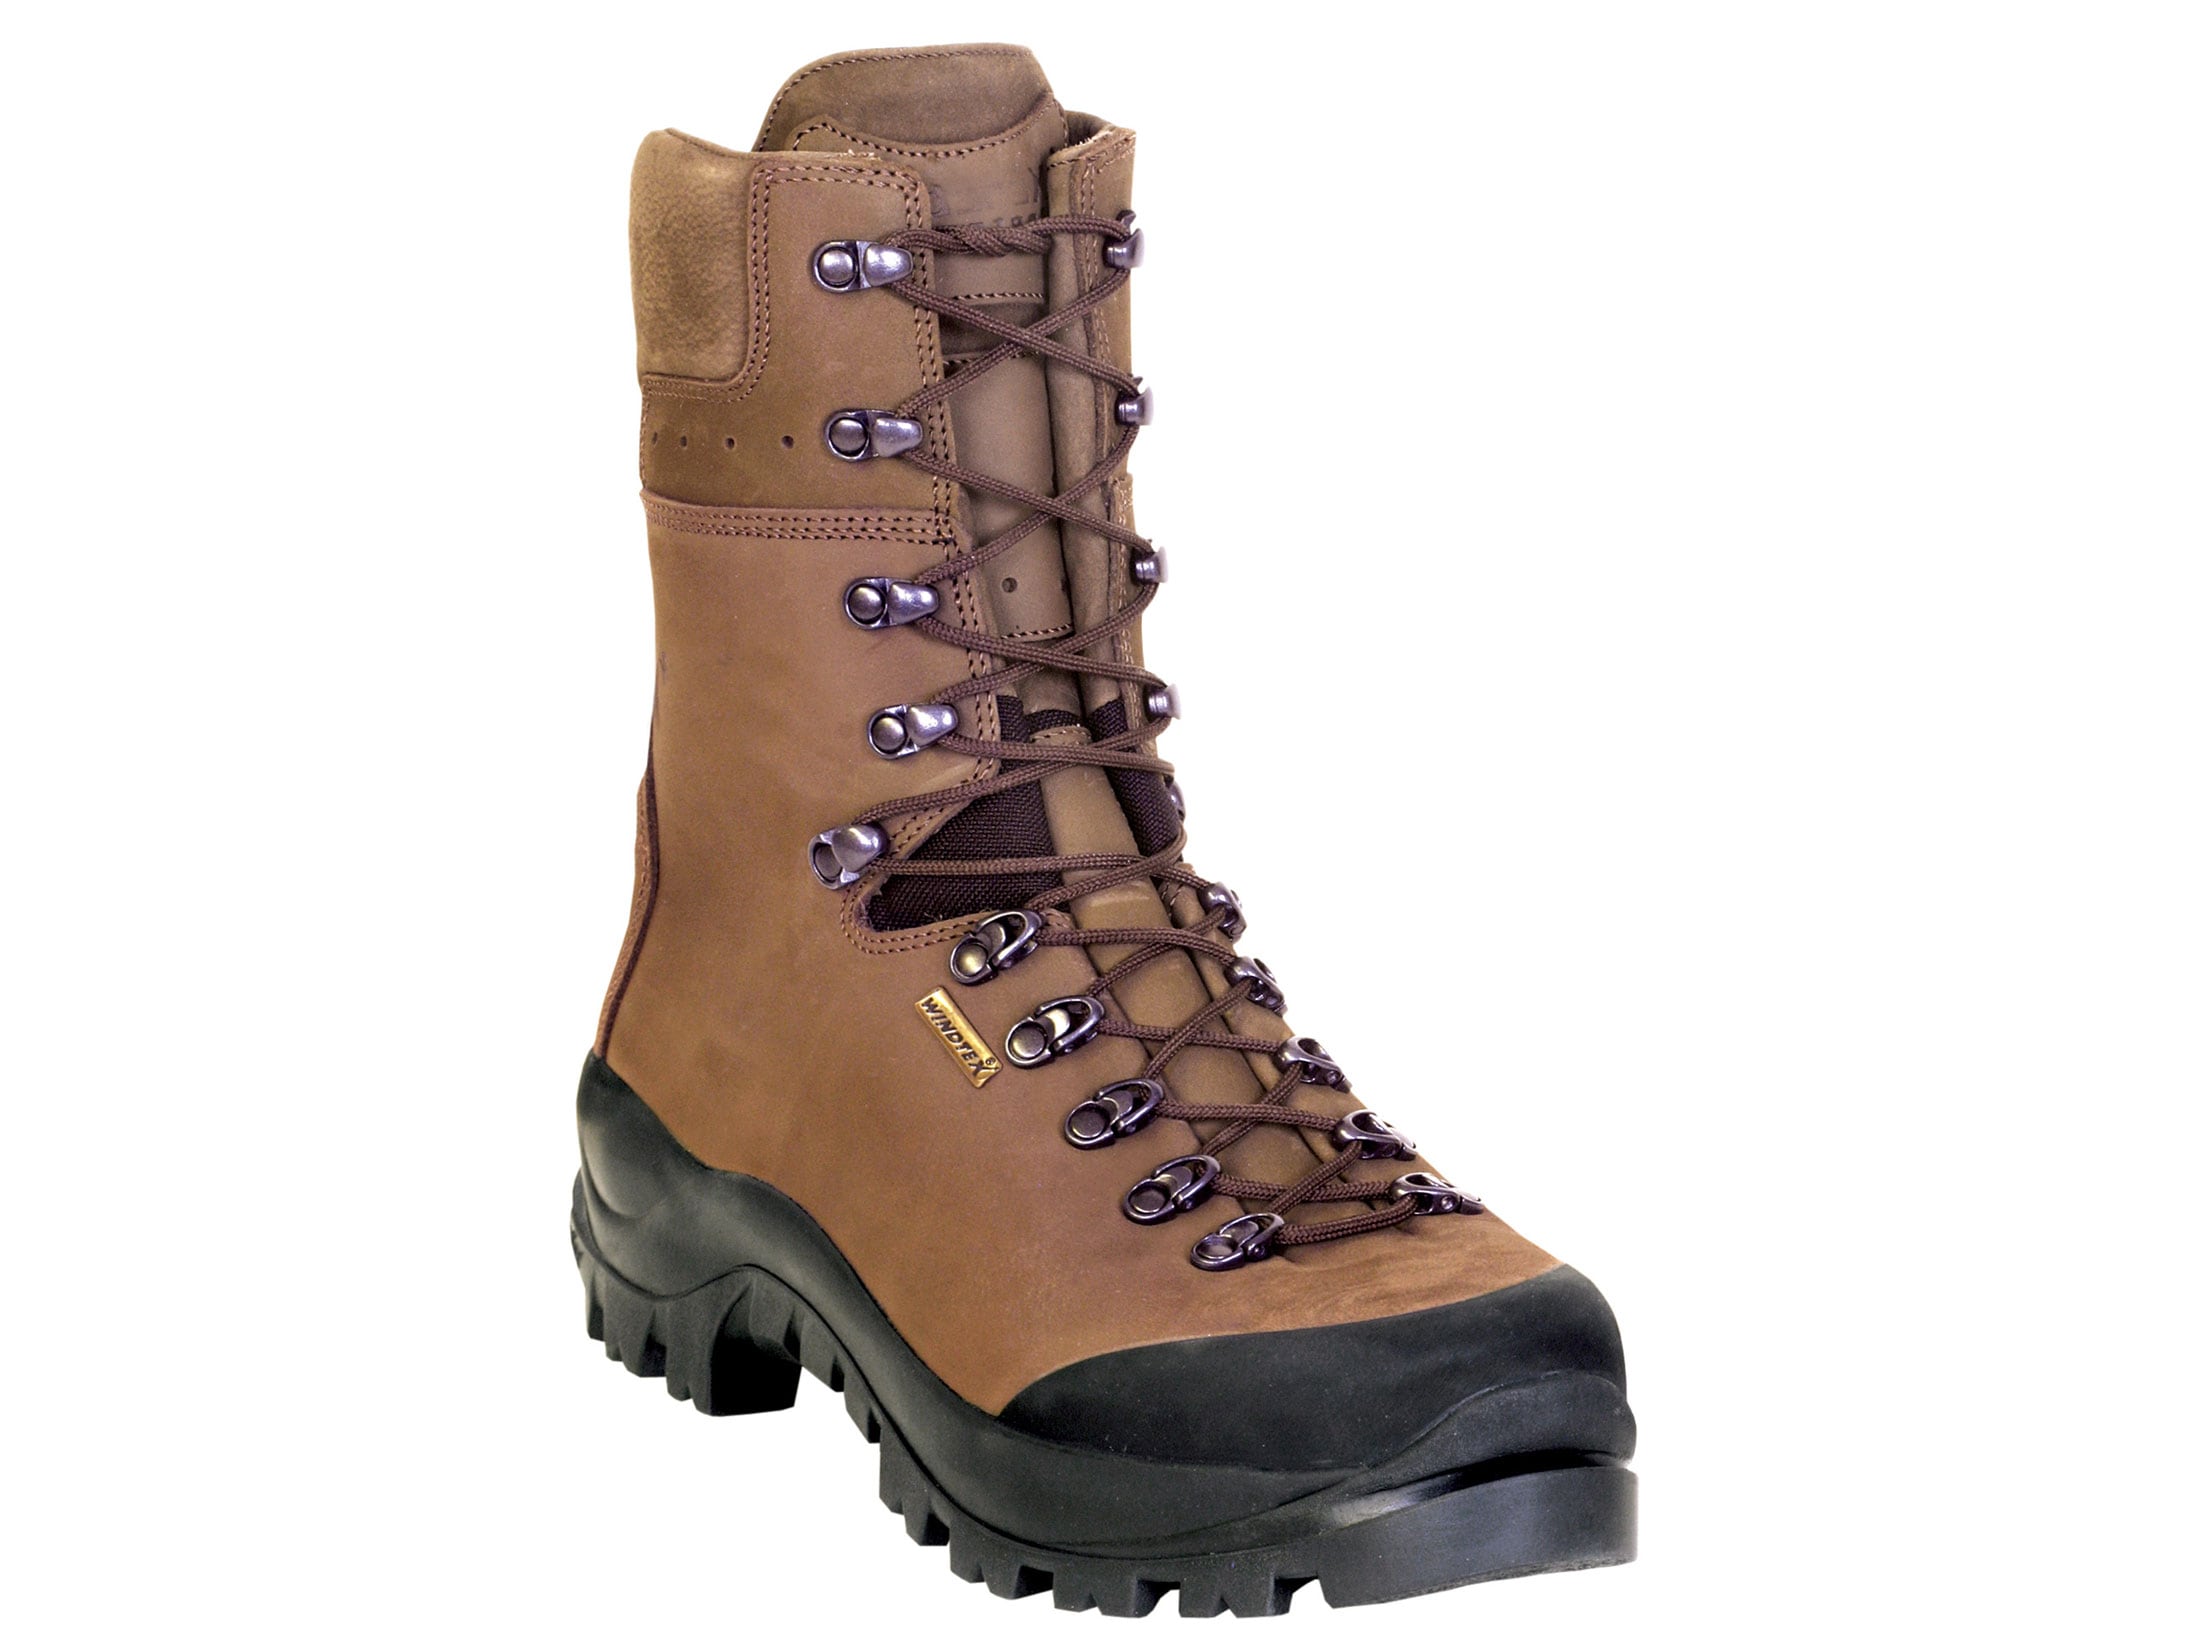 Kenetrek Mountain Guide 10 Hunting Boots Leather Brown Men's 13 D